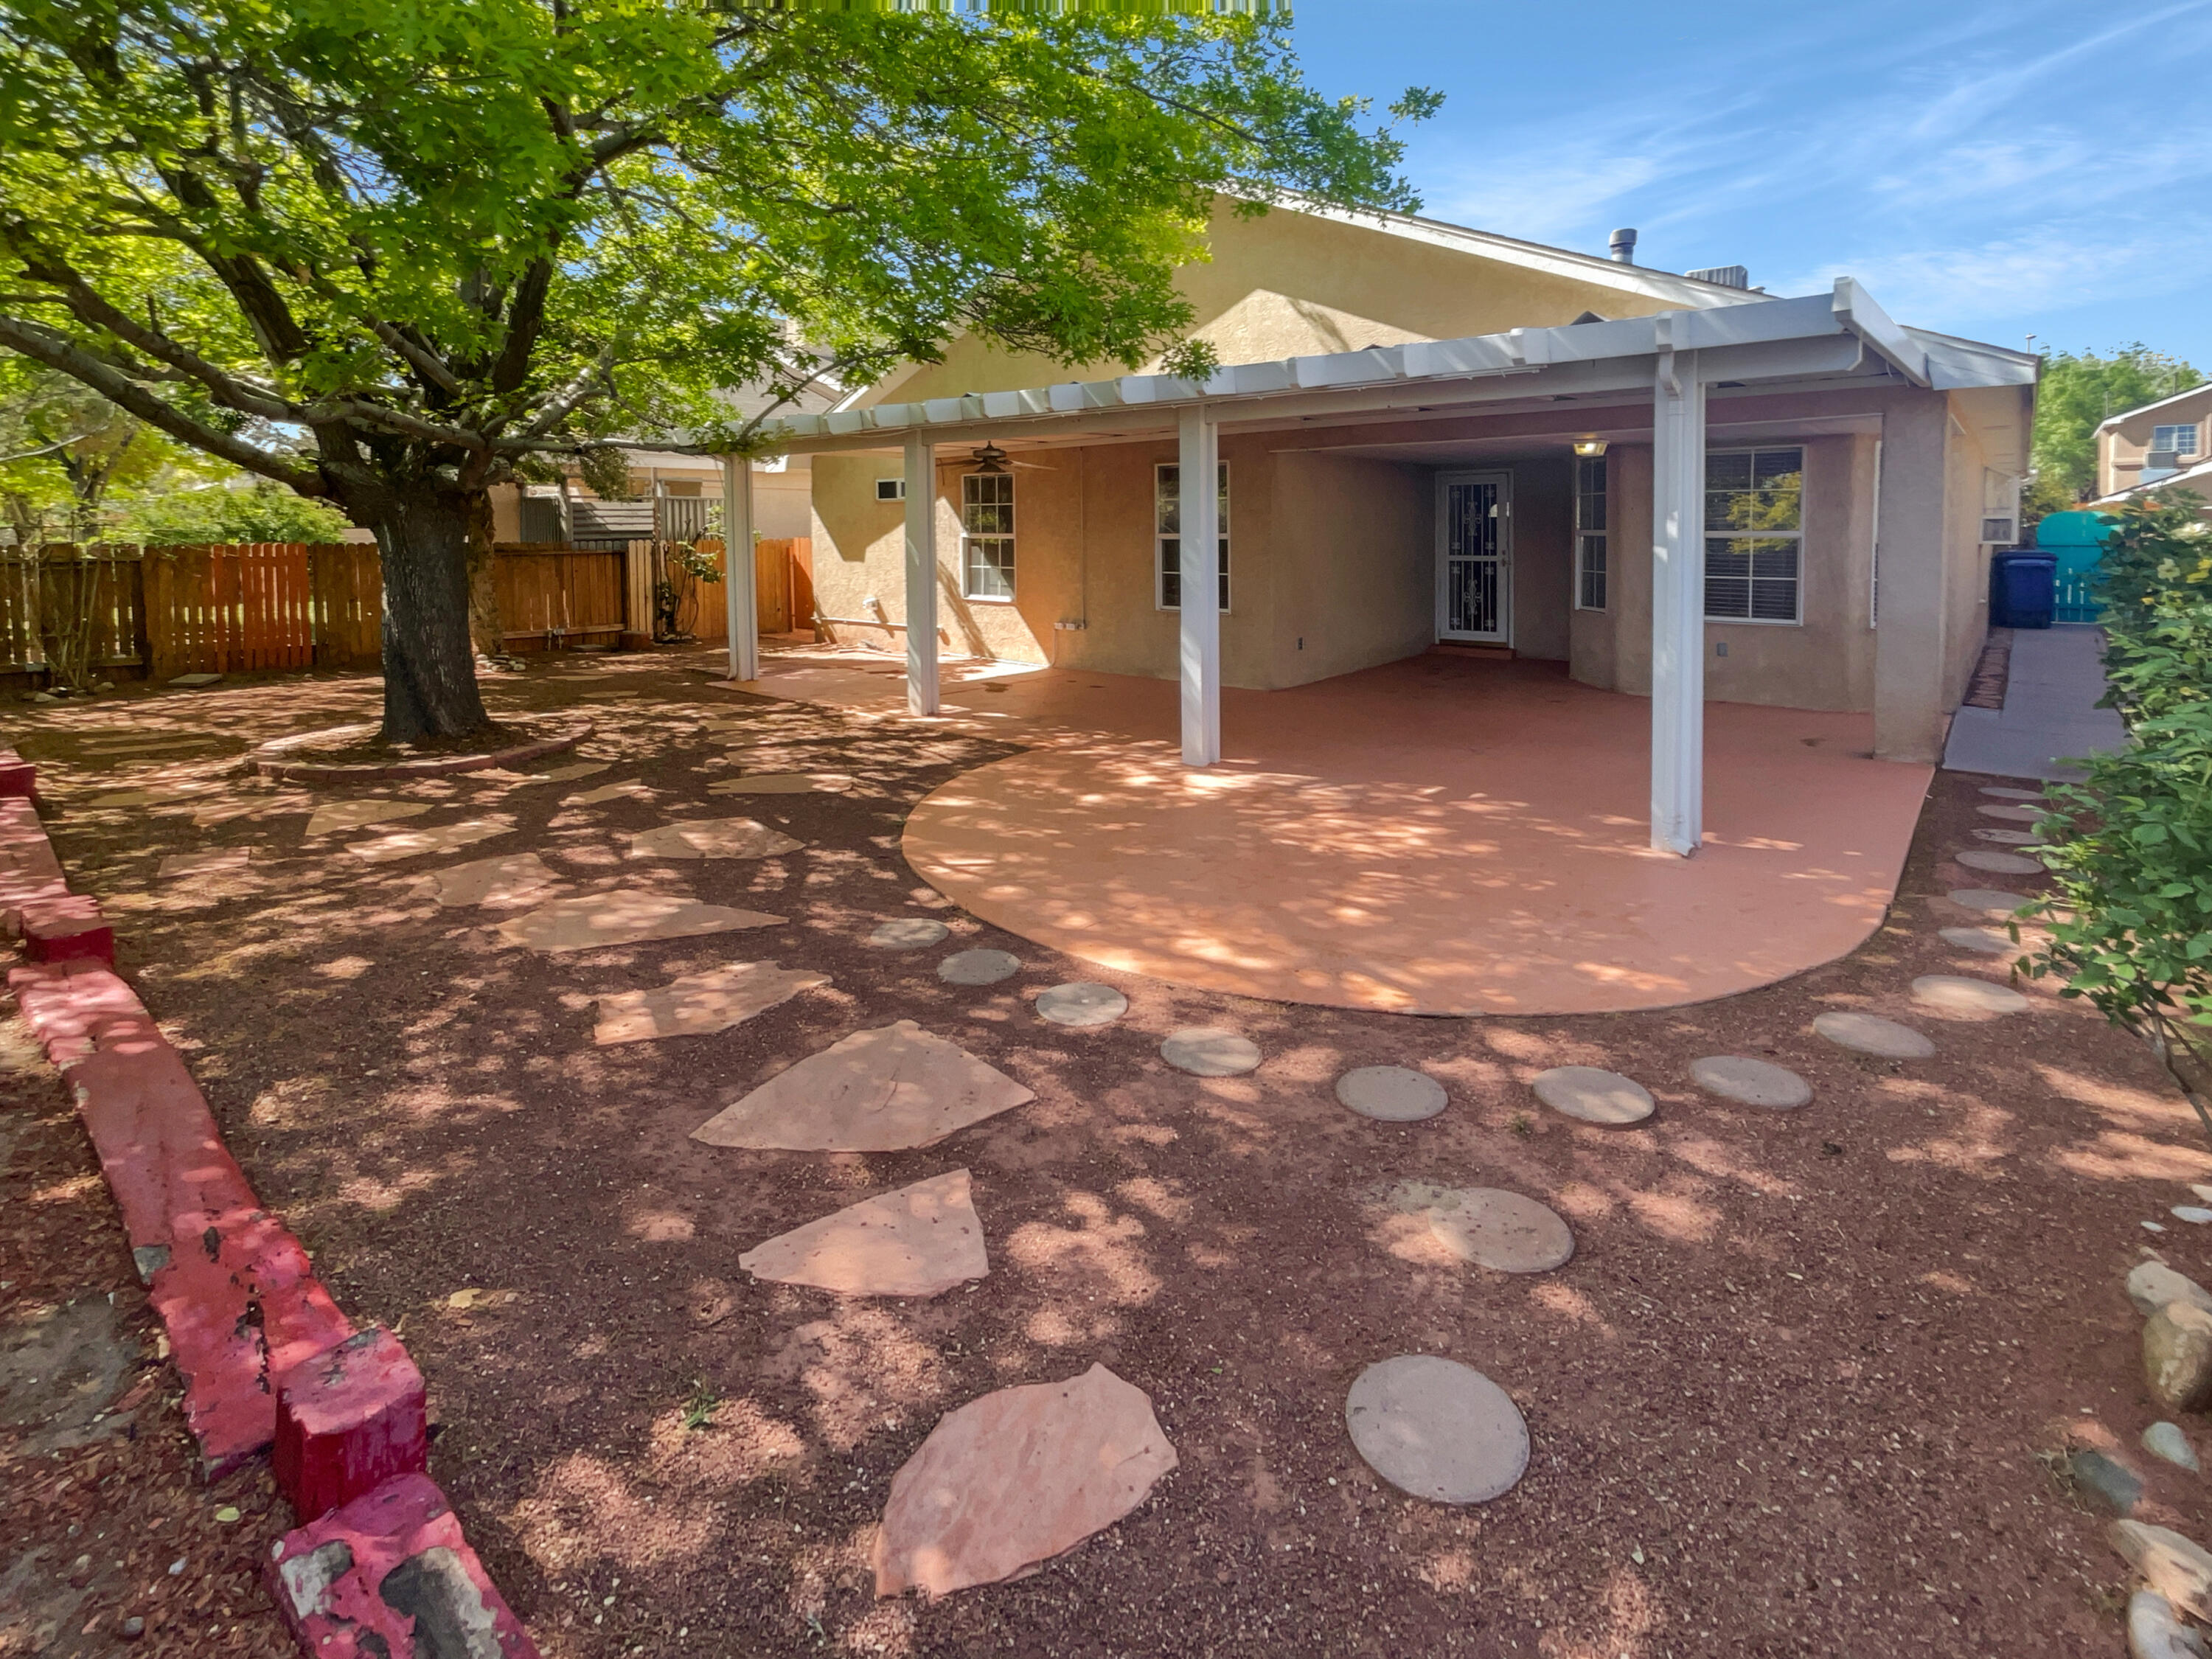 6212 Summerwood Road NW, Albuquerque, New Mexico 87120, 3 Bedrooms Bedrooms, ,2 BathroomsBathrooms,Residential,For Sale,6212 Summerwood Road NW,1061322